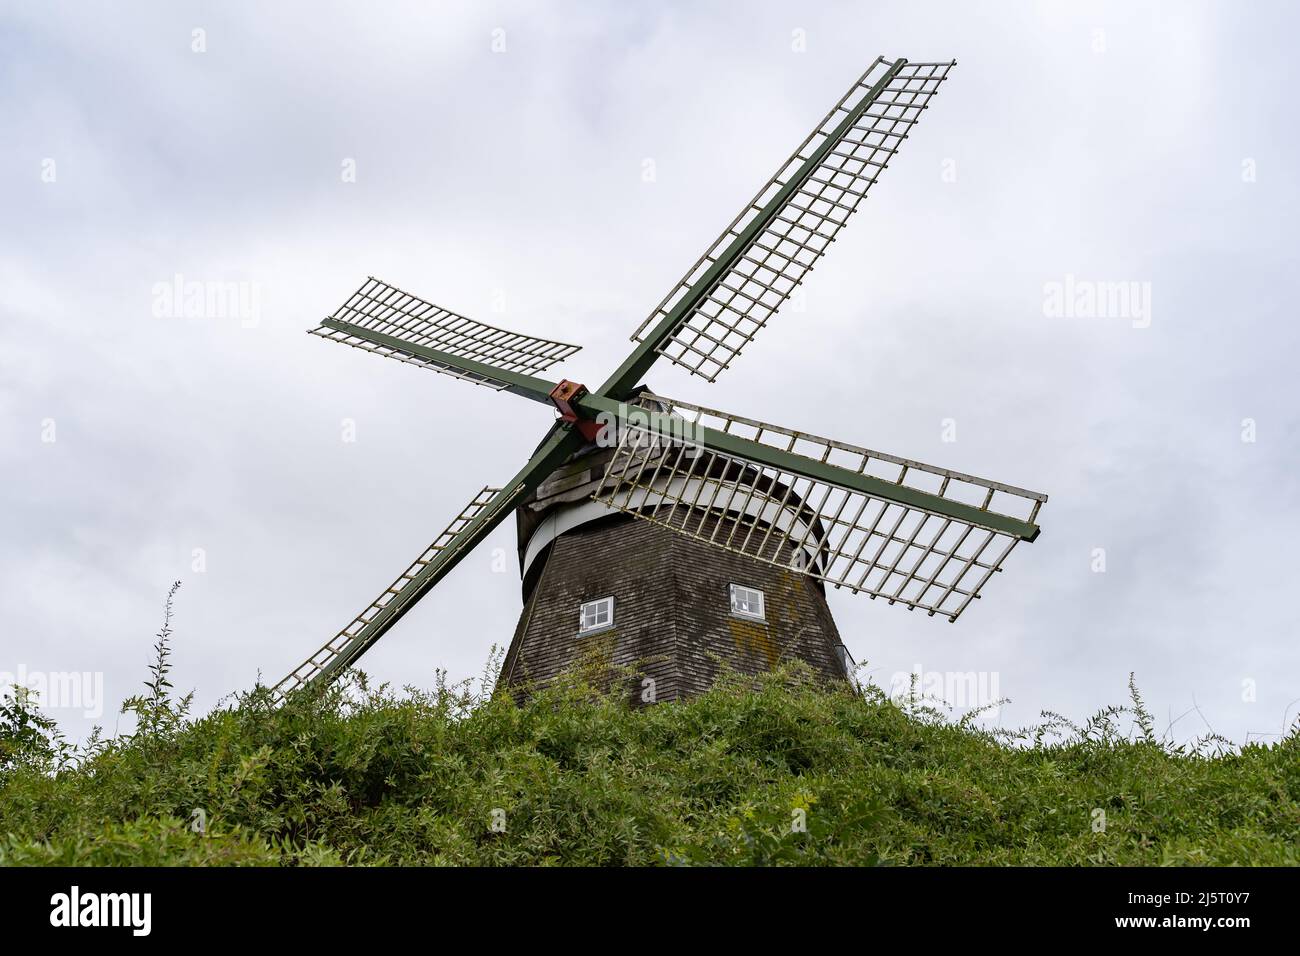 The famous windmill in front of the sky. An old historic building made of wooden planks. Sightseeing in Röbel to visit the landmark. Stock Photo